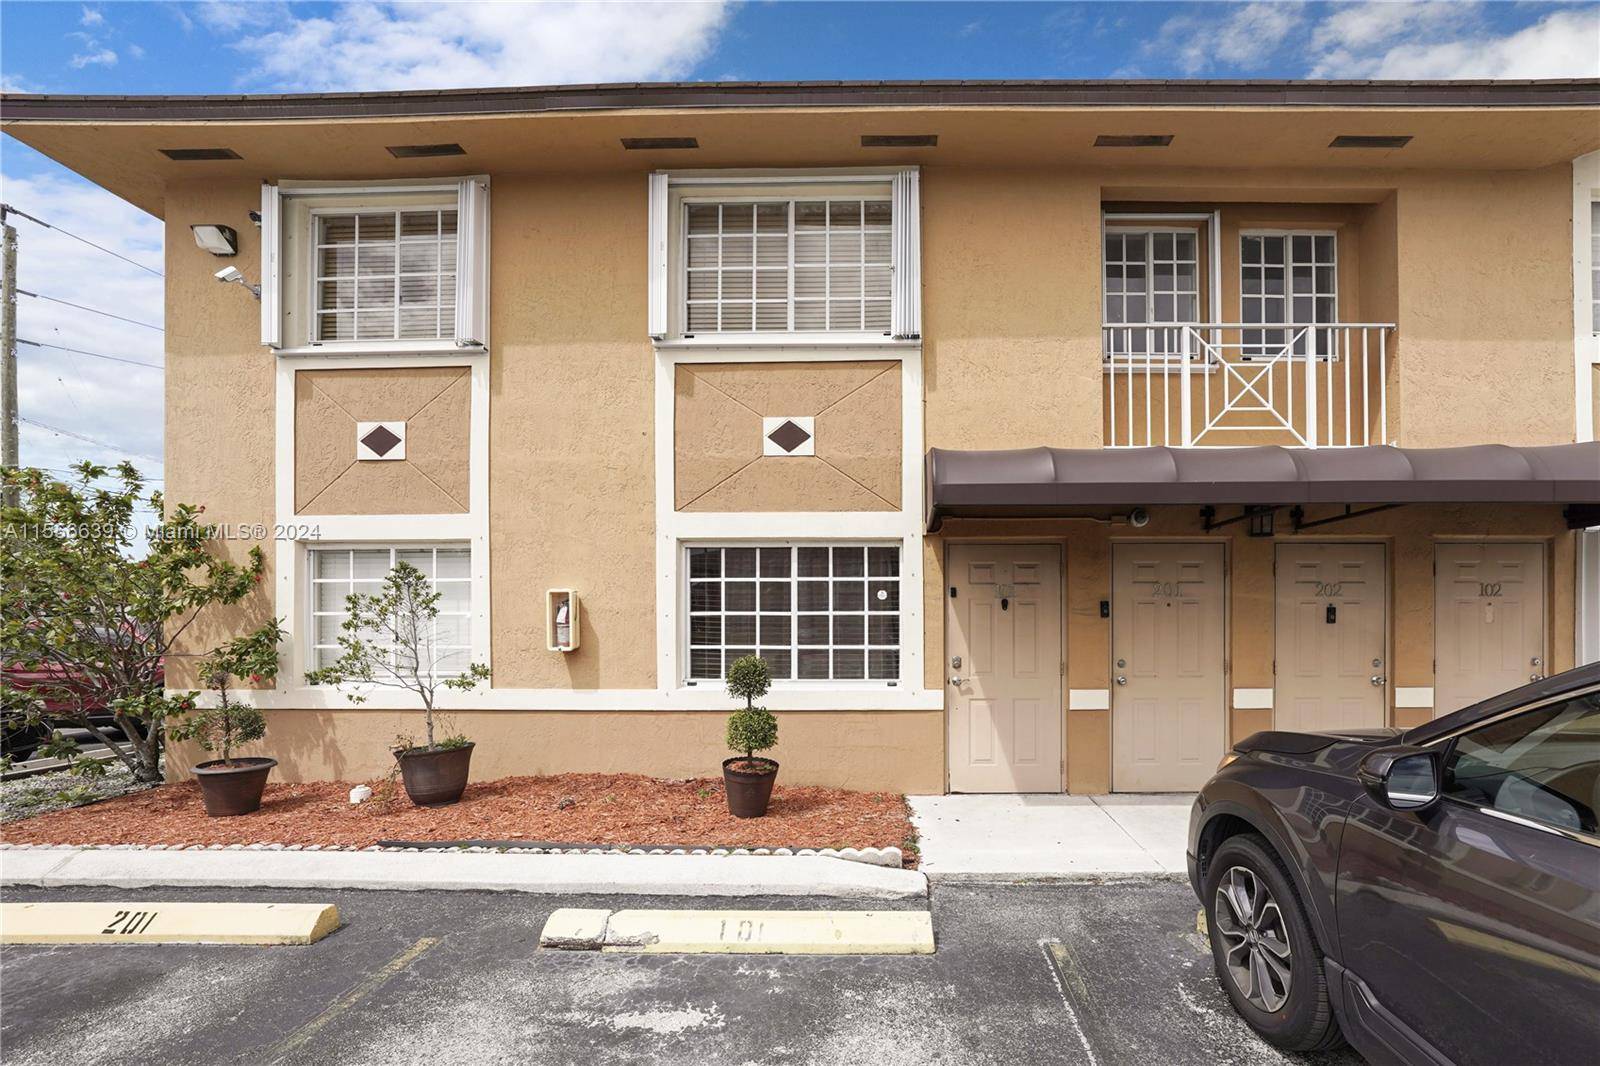 This conveniently situated corner unit condo offers 2 bedrooms and 2 bathrooms on the ground floor for easy access.